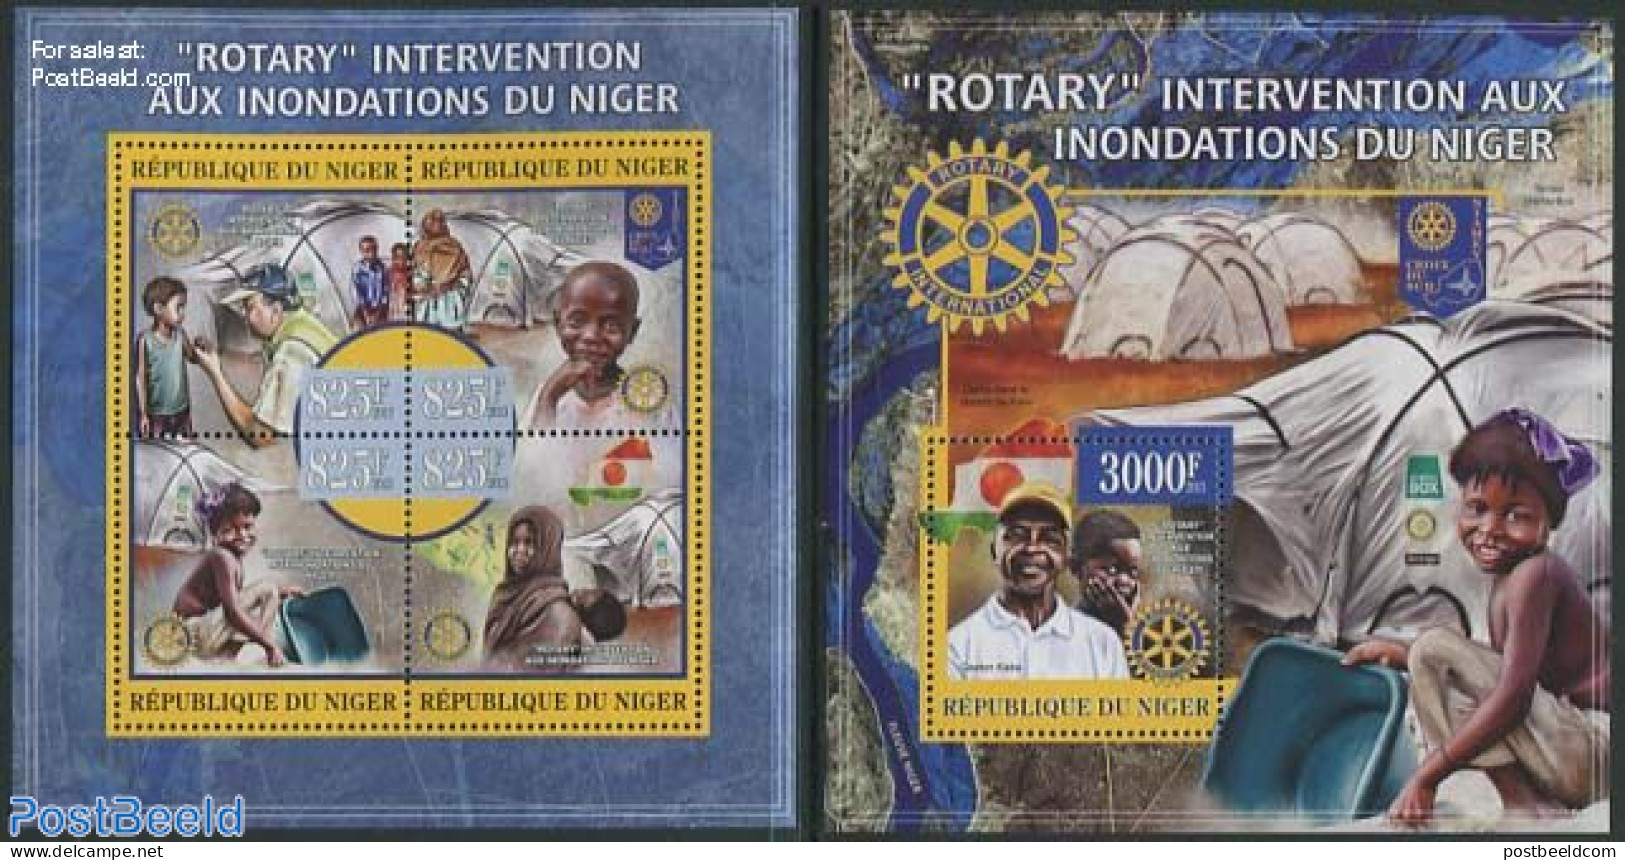 Niger 2013 Rotary Aid At Innondations 2 S/s, Mint NH, History - Various - Rotary - Disasters - Rotary, Lions Club